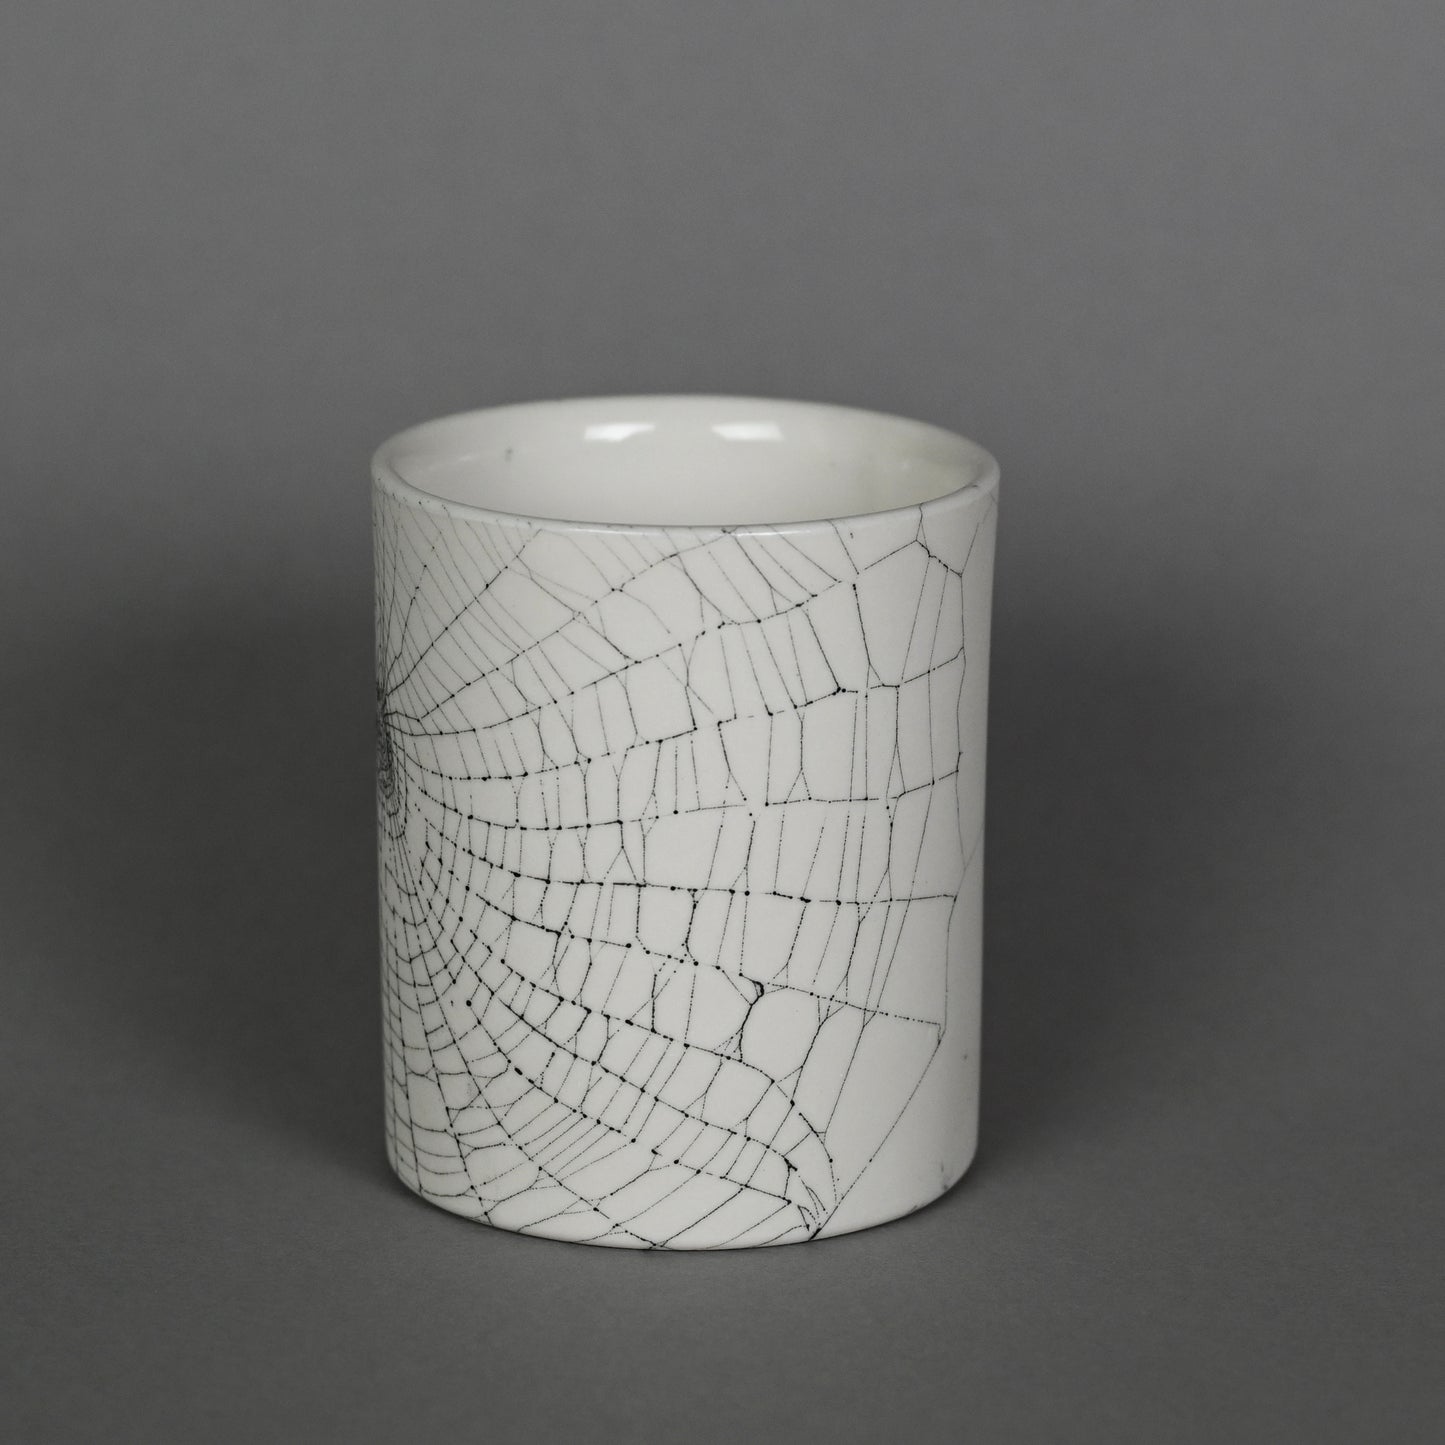 Web on Clay (211), Collected September 30, 2022